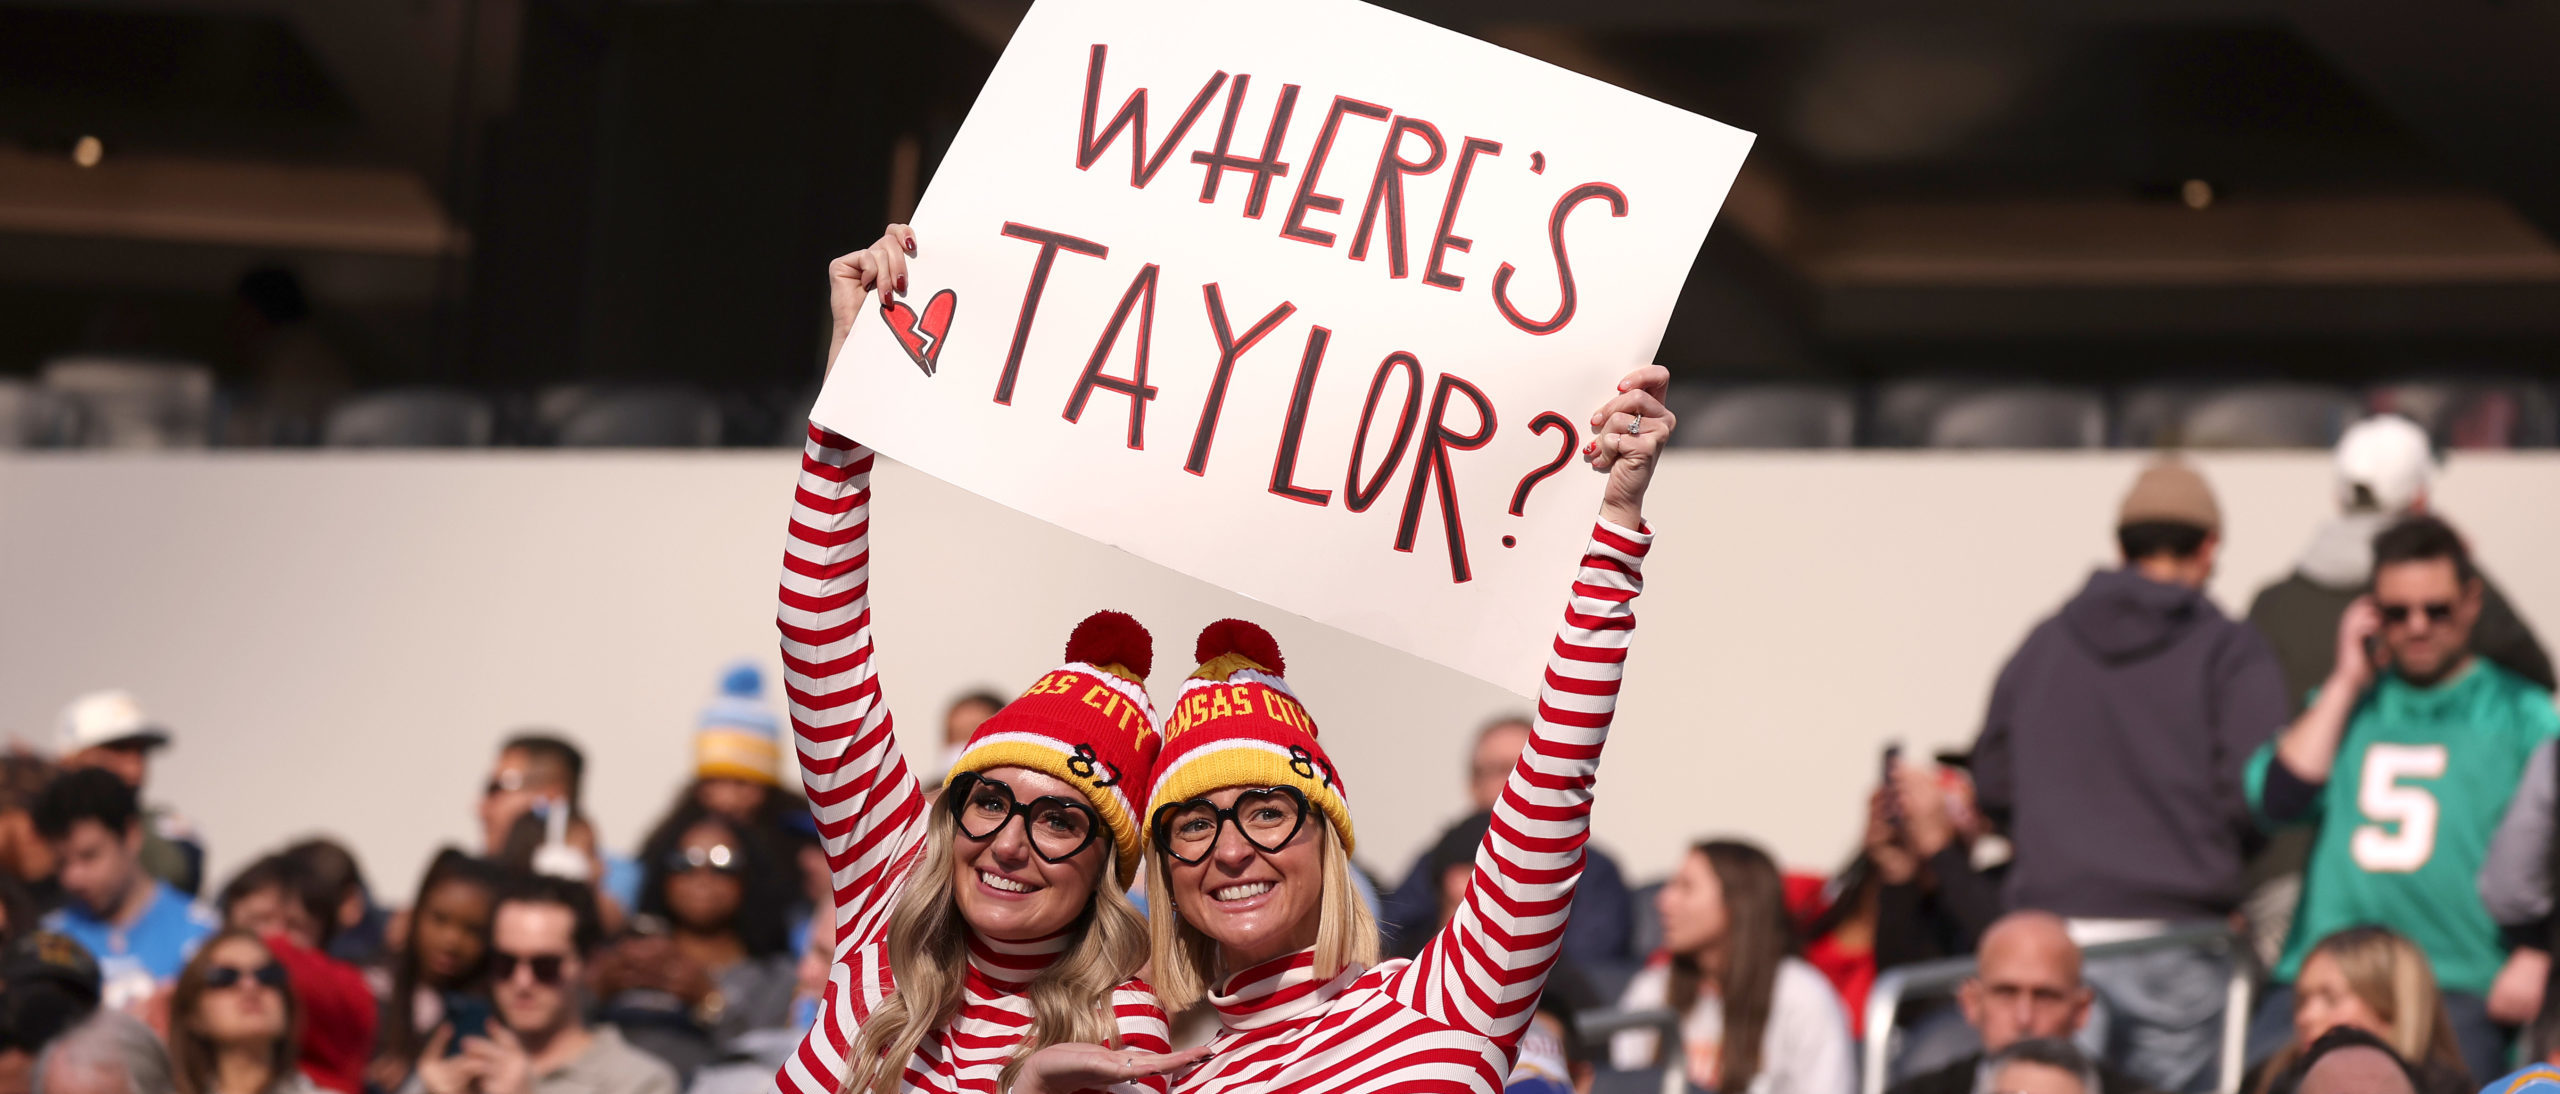 Taylor Swift, Subscriptions And Cupcake-ism: What The Hell Is Going On With The NFL?